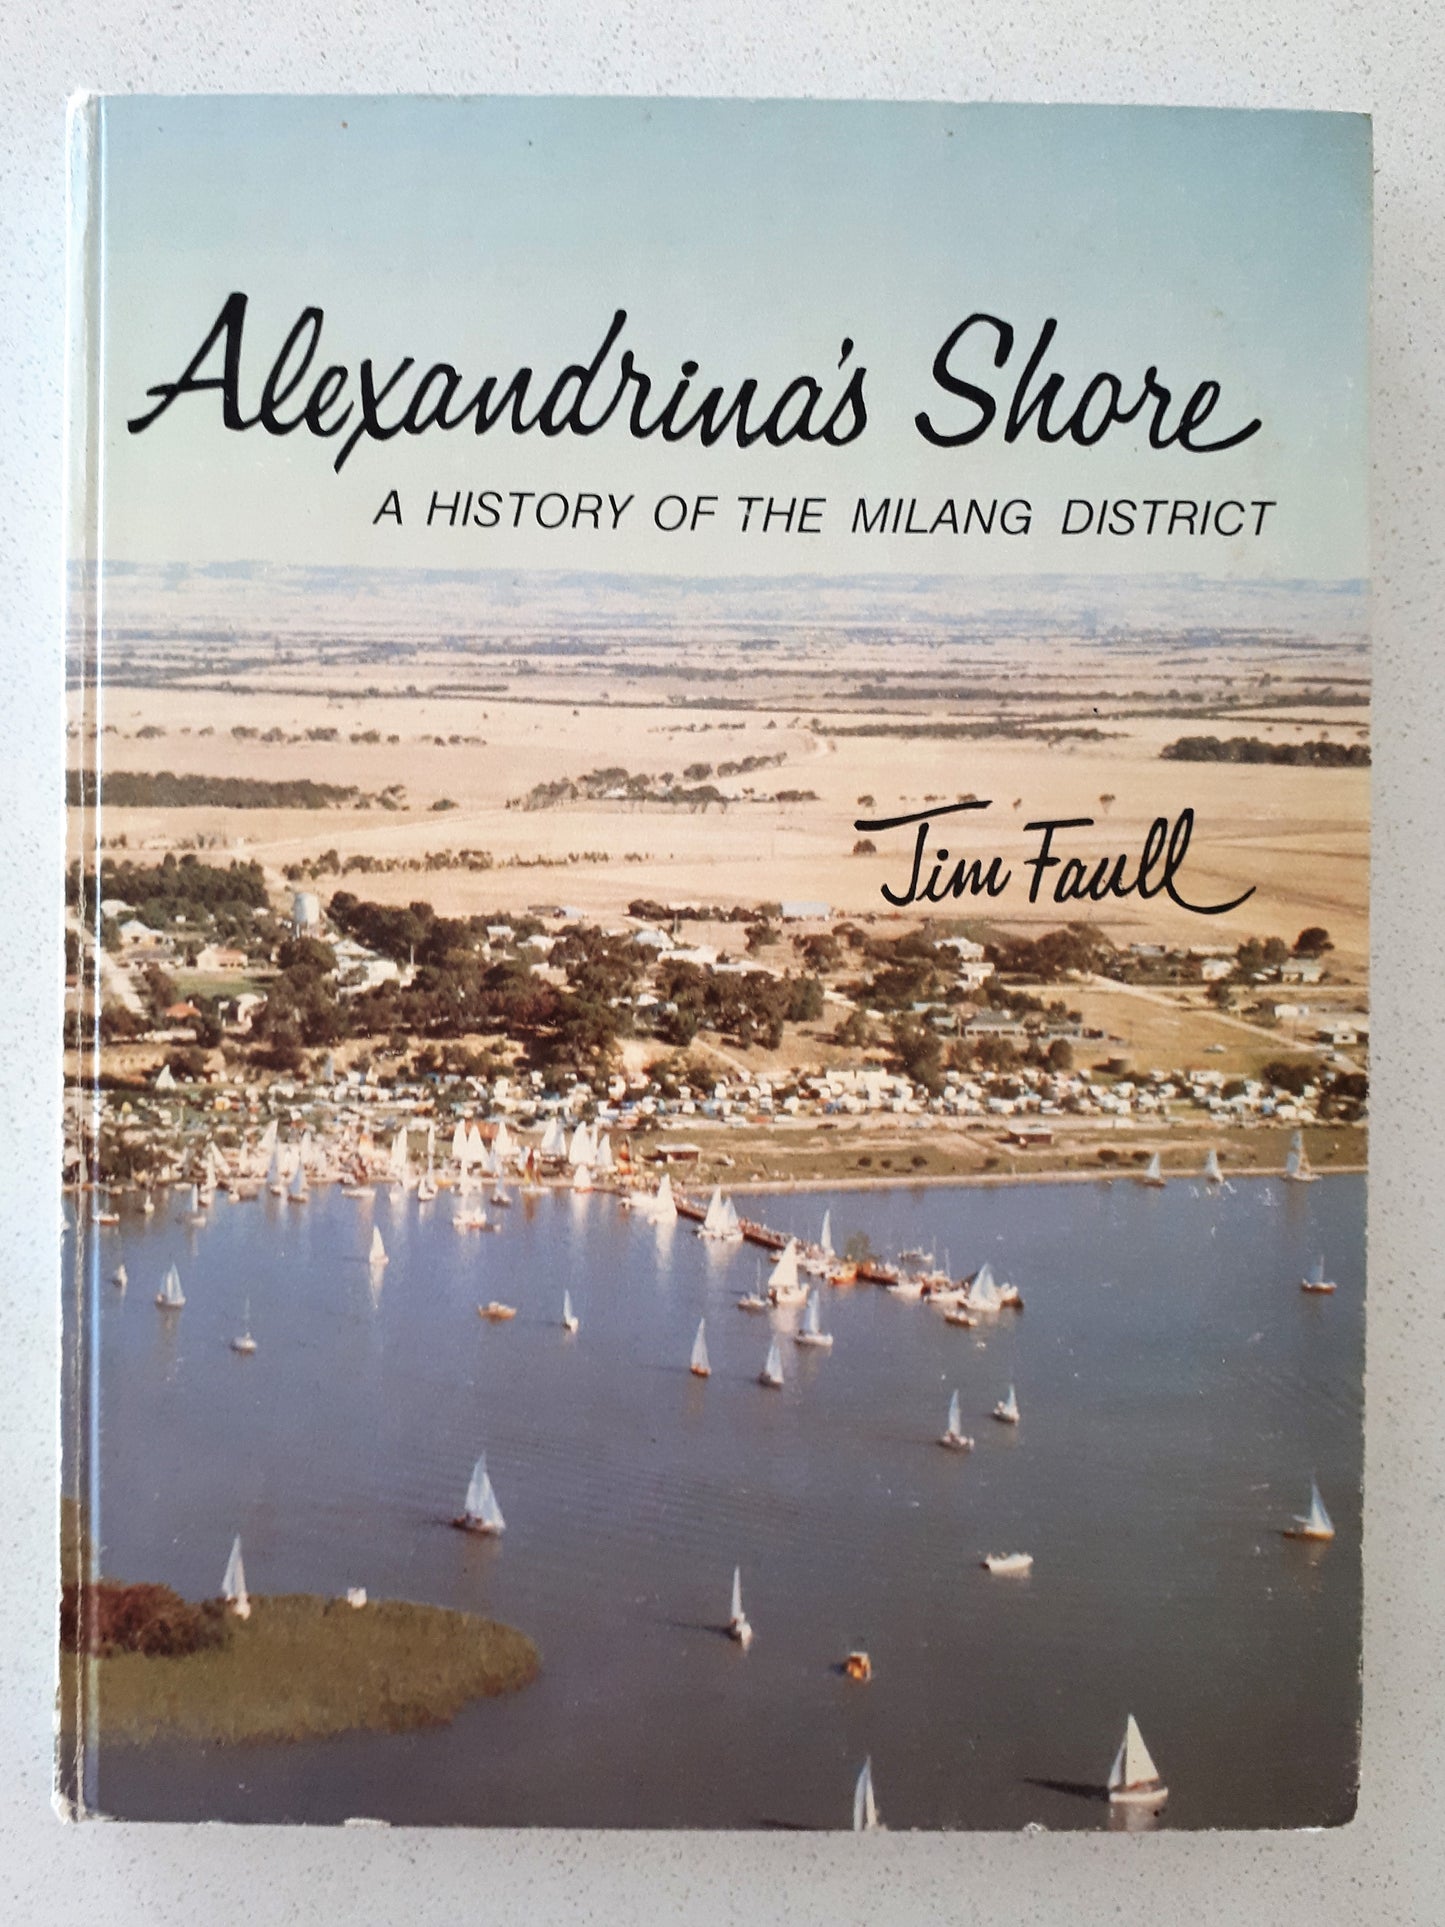 Alexandrina's Shore: A History of the Milang District by Jim Faull